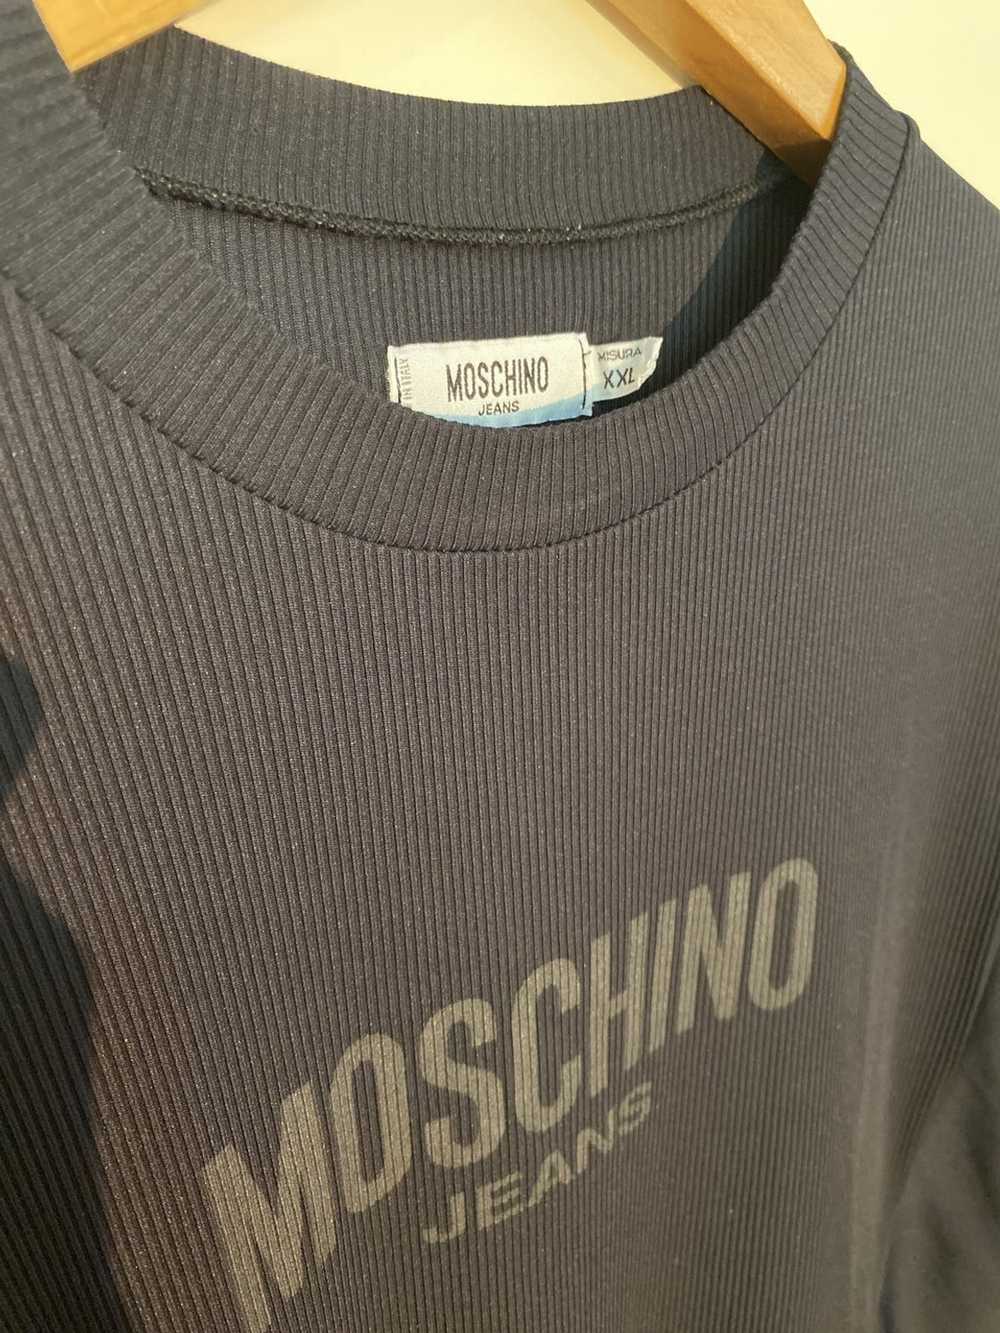 Moschino × Vintage 90s Moschino Jeans Black tee - image 2